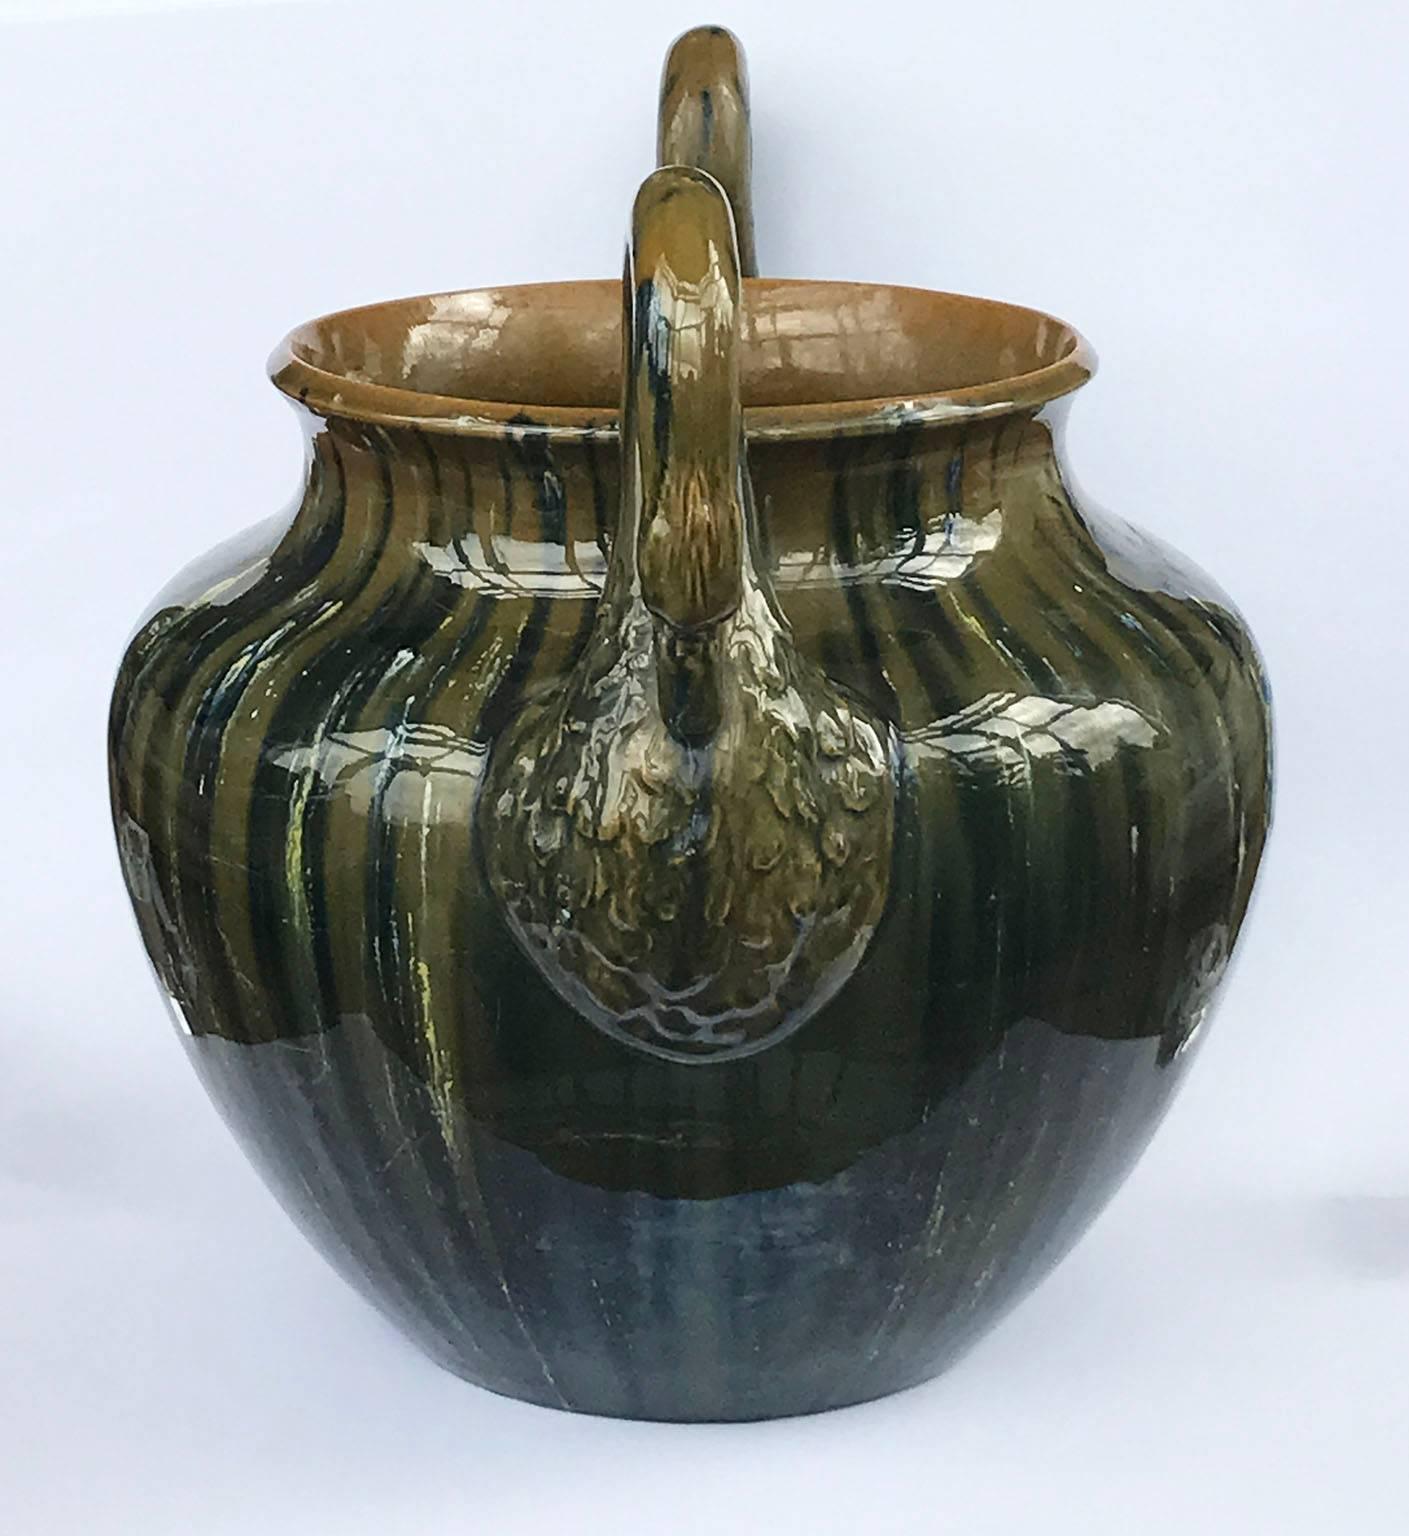 An elegant and rare Jerome Massier Majolica arts & crafts jardiniere, circa 1880, The bulbous body in rich, luminous and iridescent glazes with two arched swan necks and heads forming the handles.
Impressed marks to base.
Interestingly this design